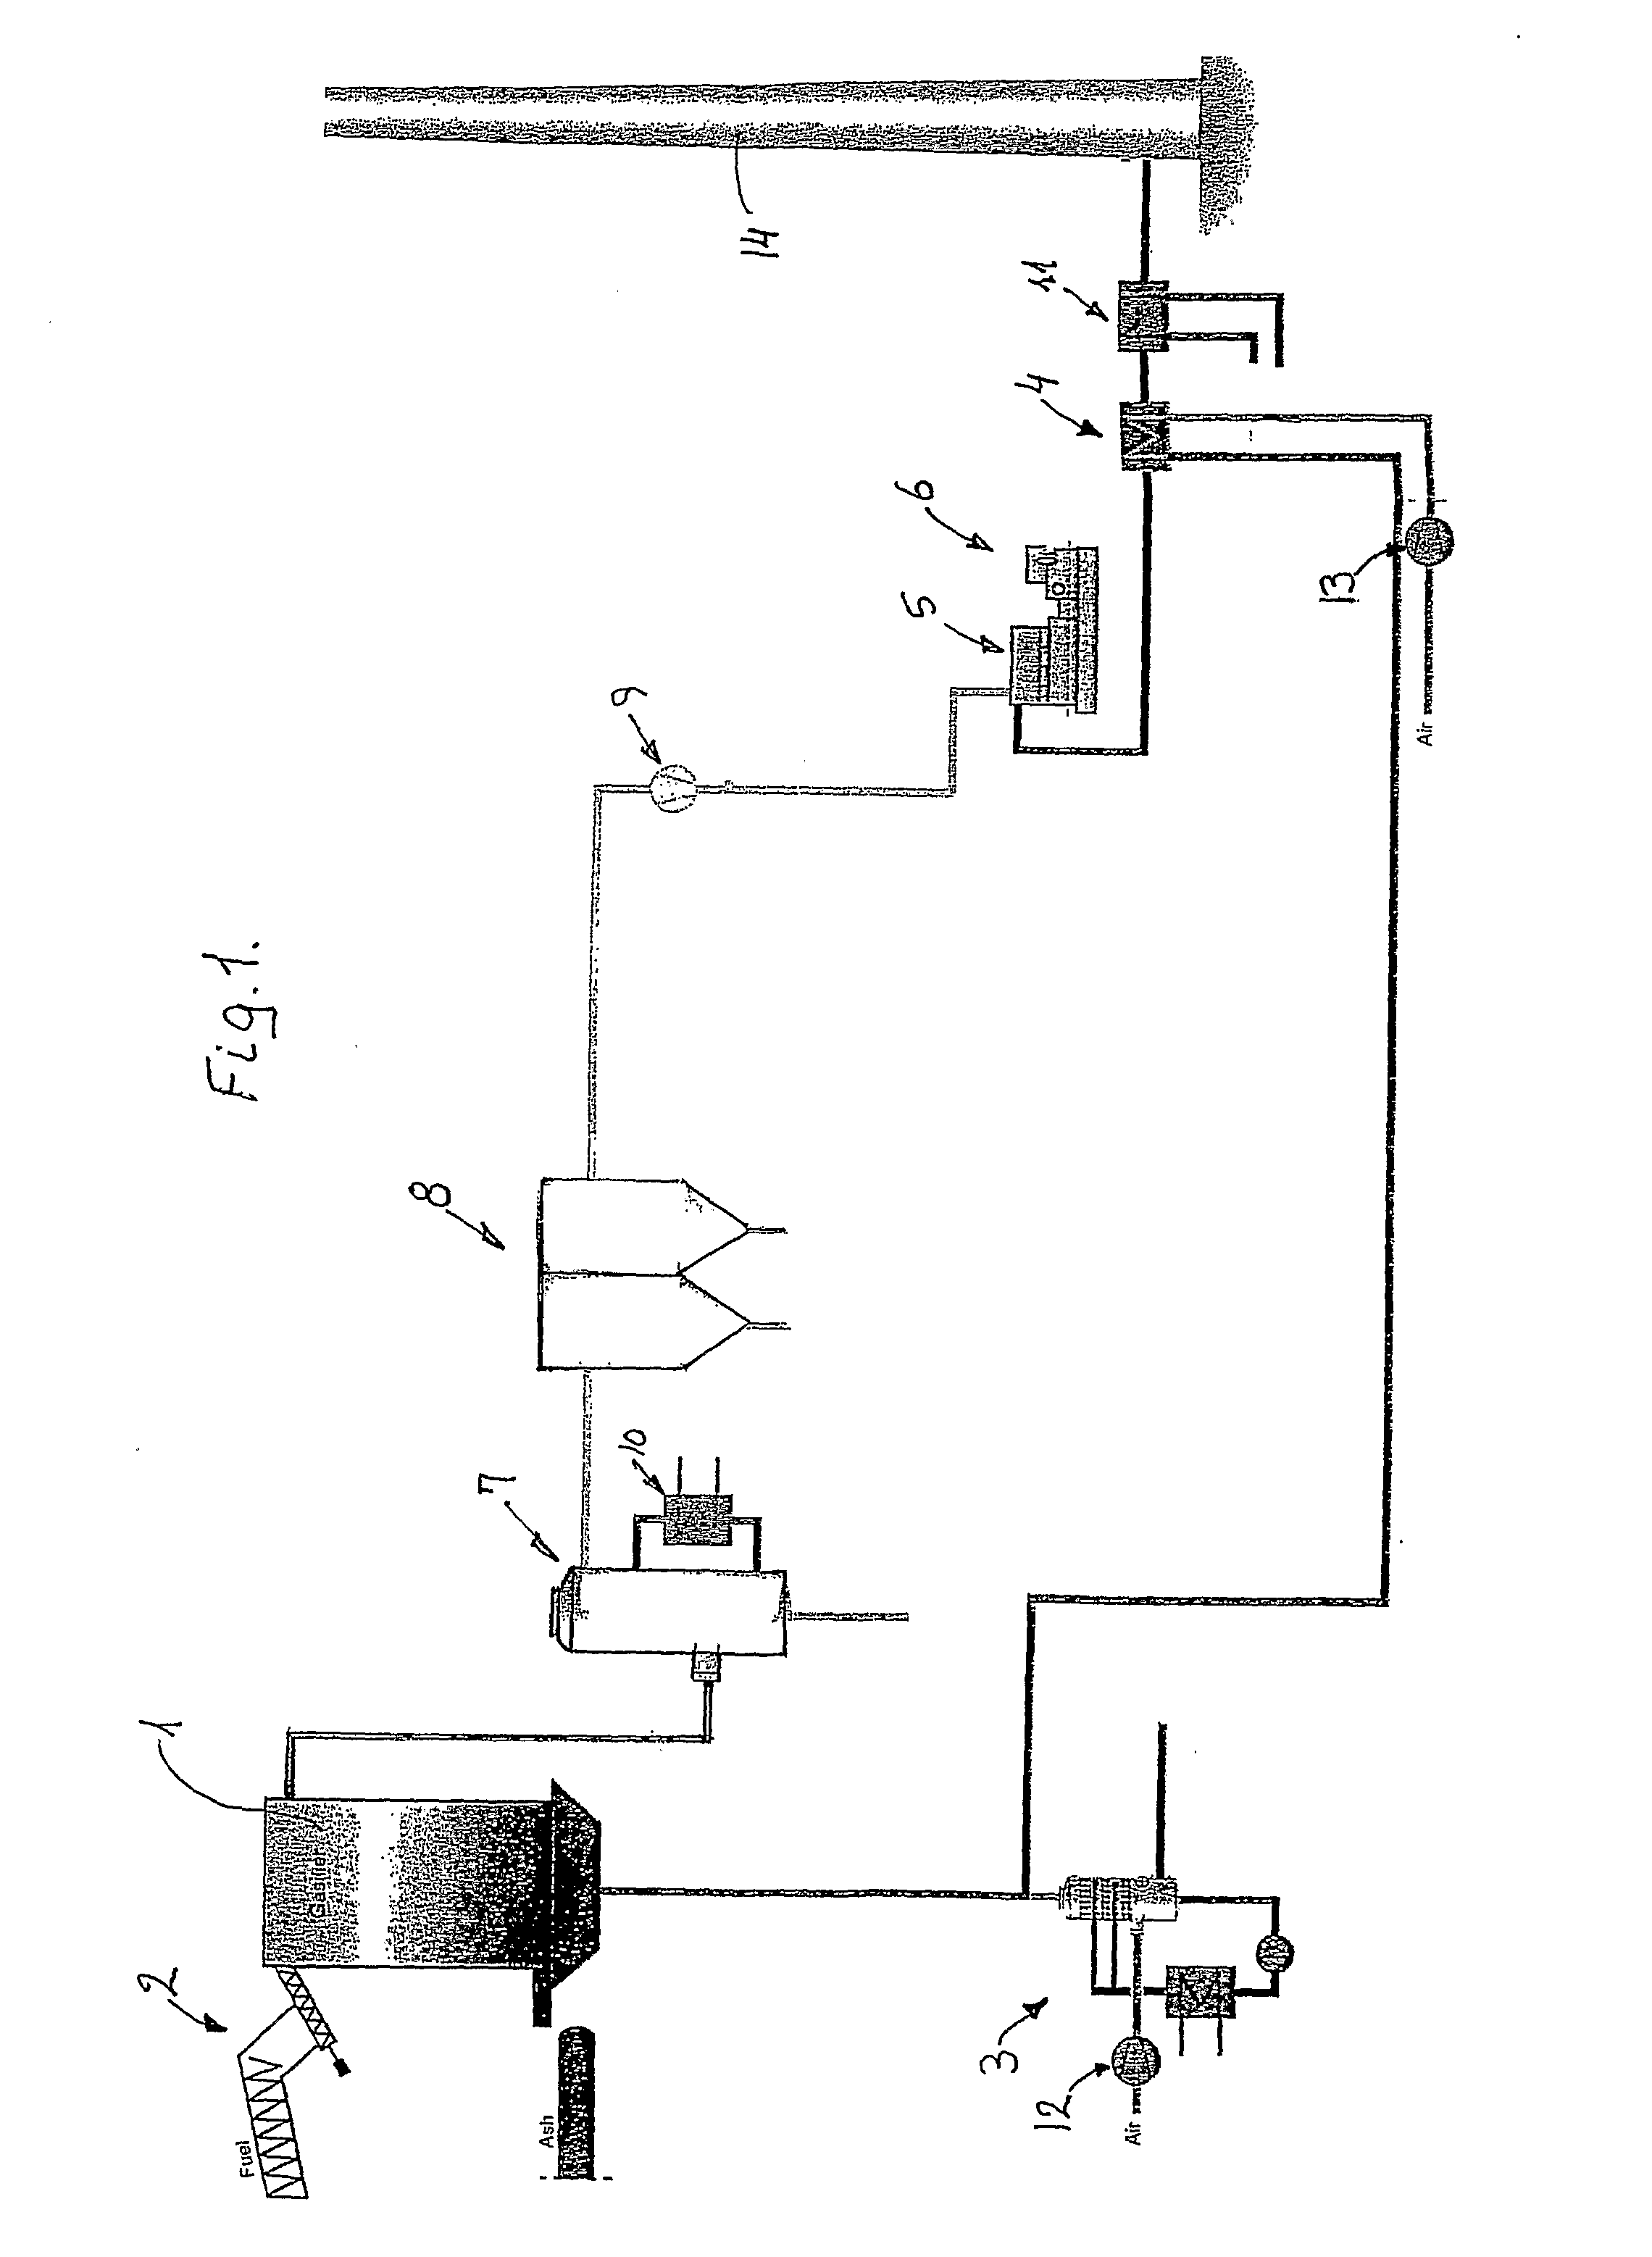 Method of controlling an apparatus for generating electric power and apparatus for use in said method